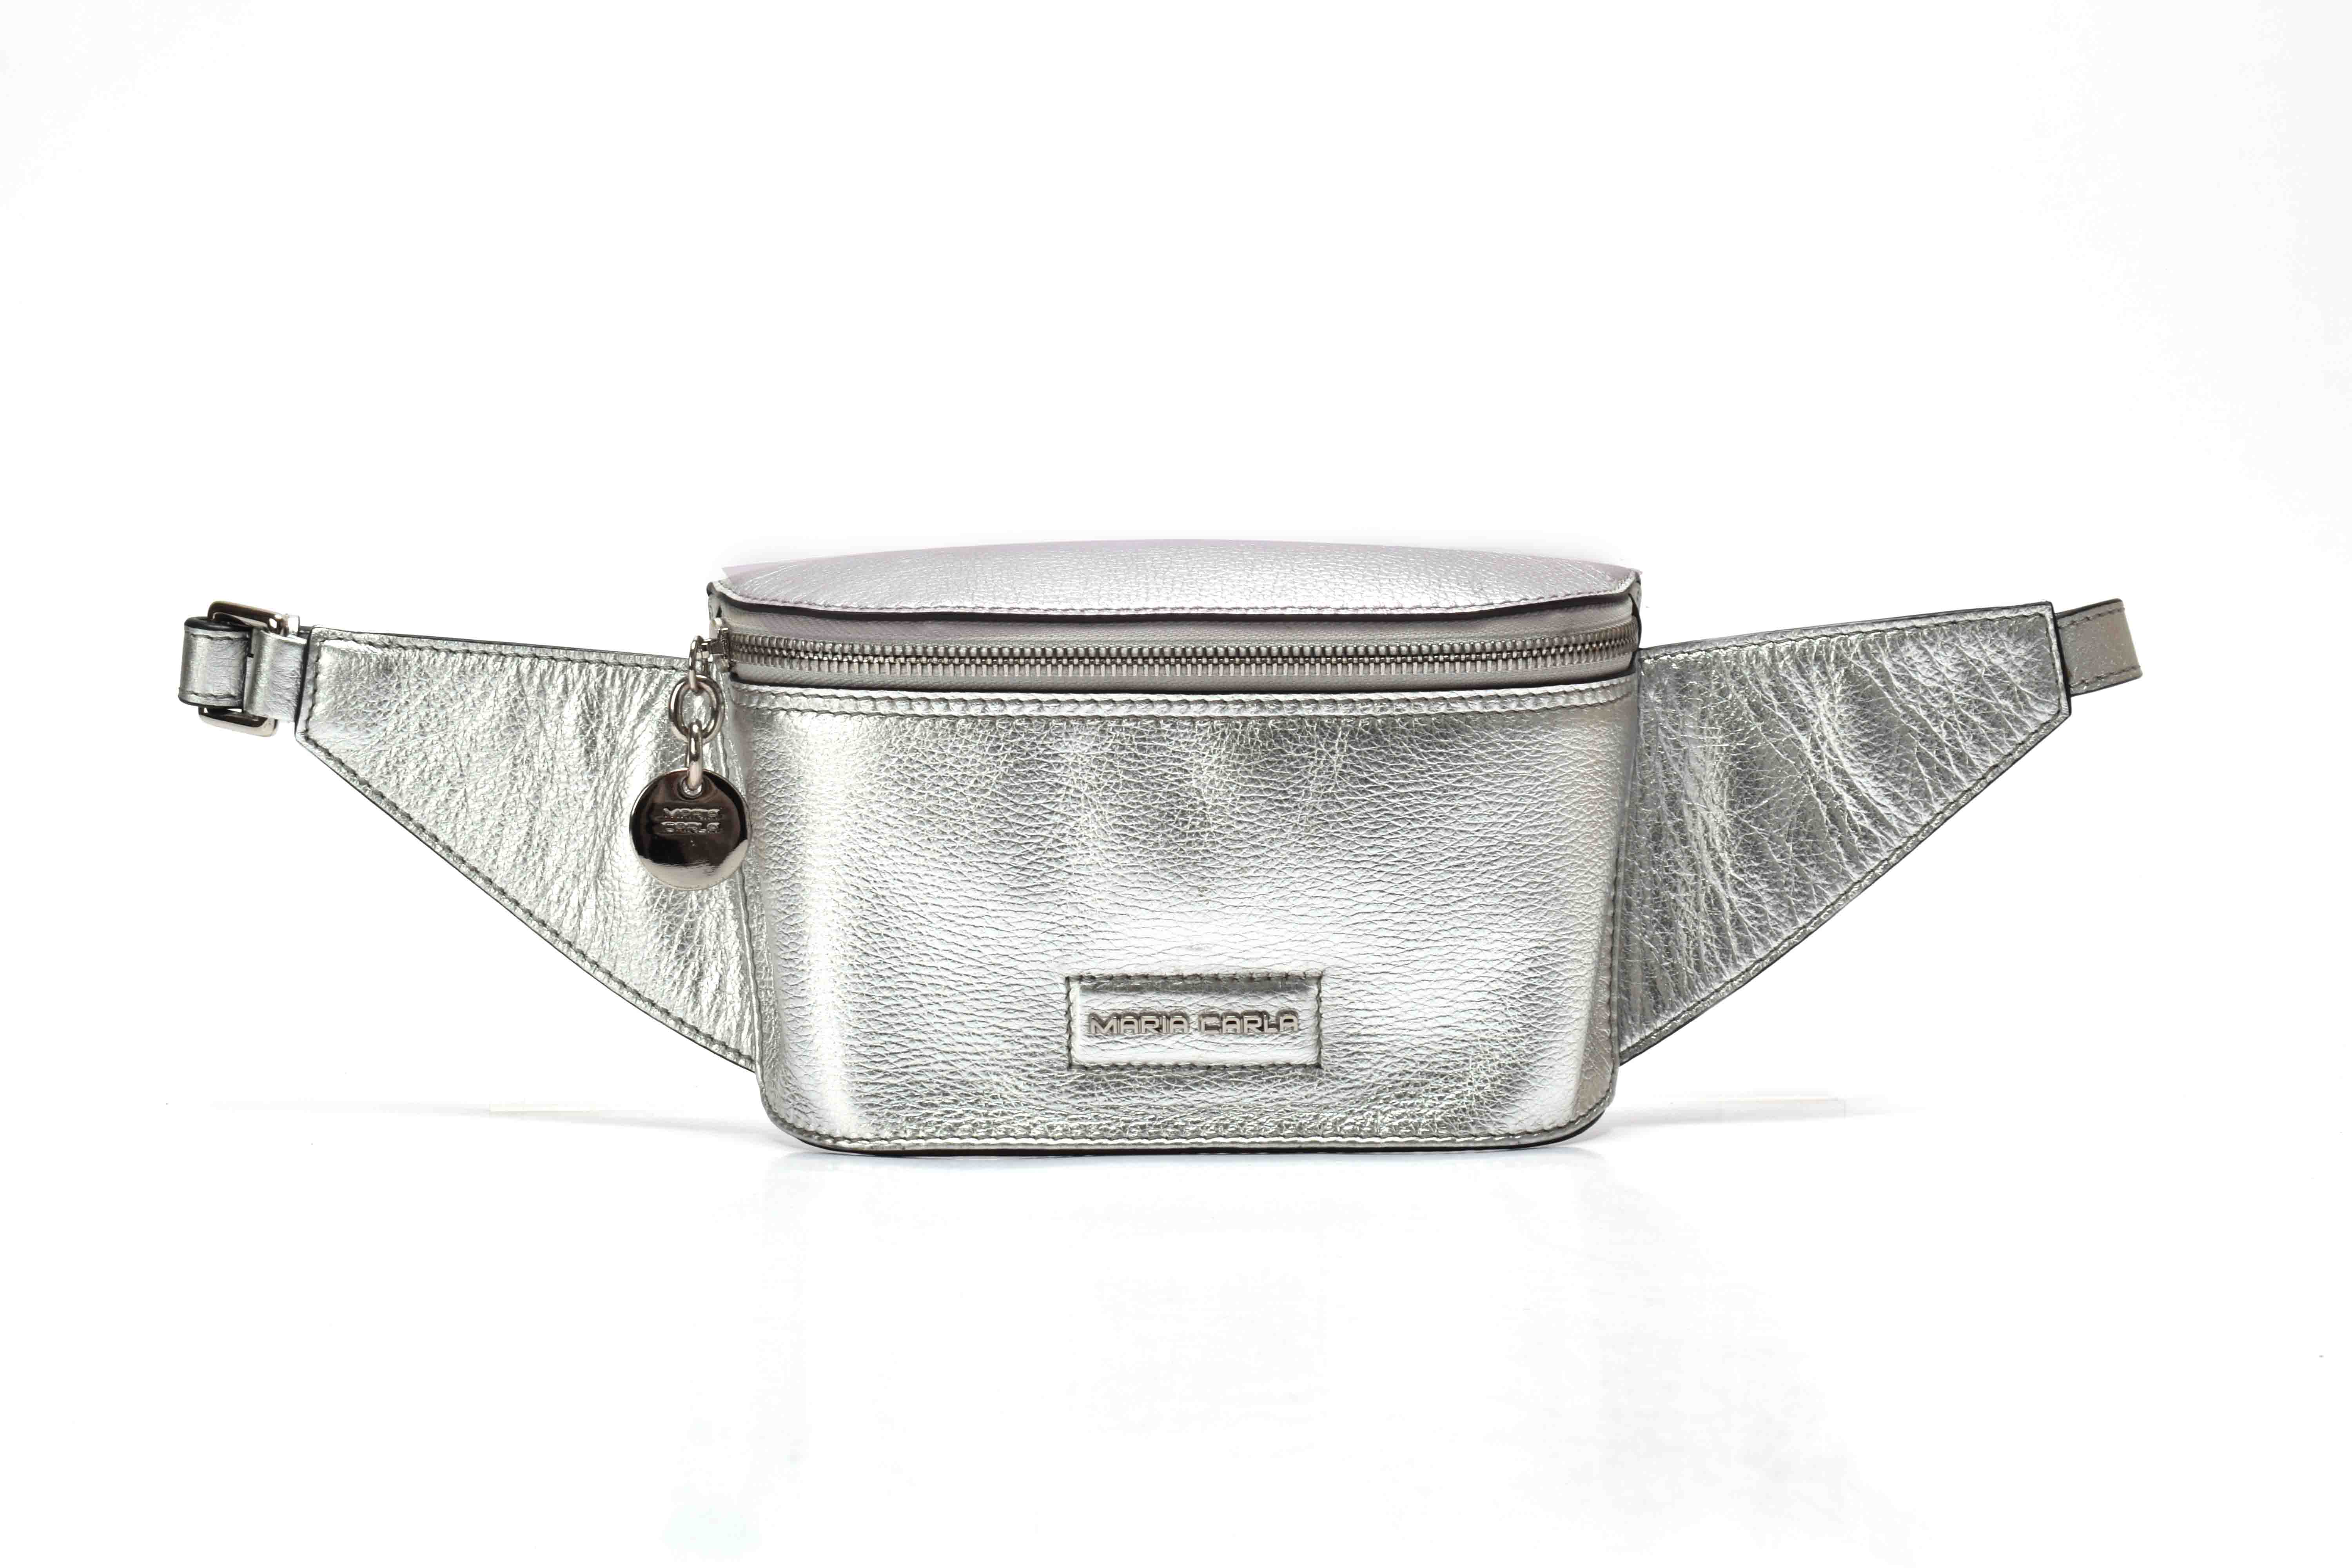 Sanlly ladies waist bag Supply for shopping-1